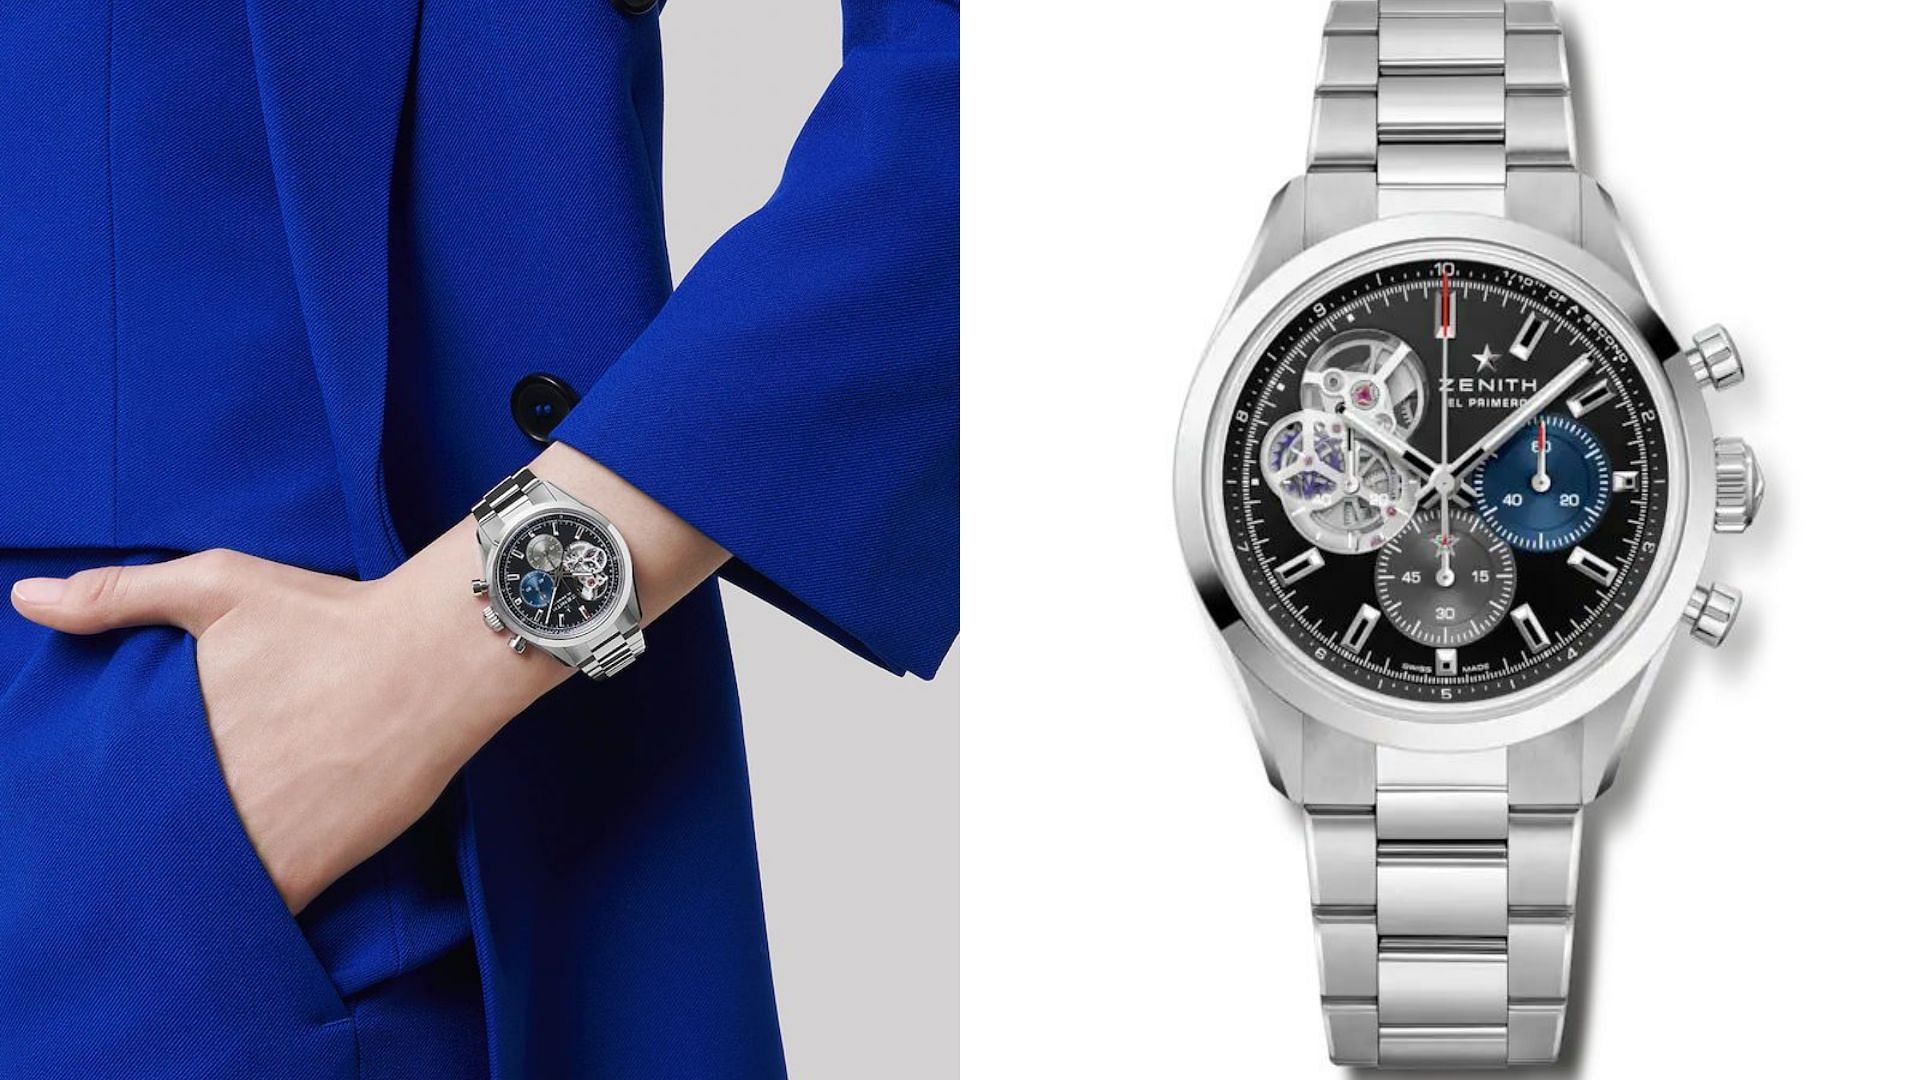 The Zenith Chronomaster Open watches will be released soon (Image via Sportskeeda)